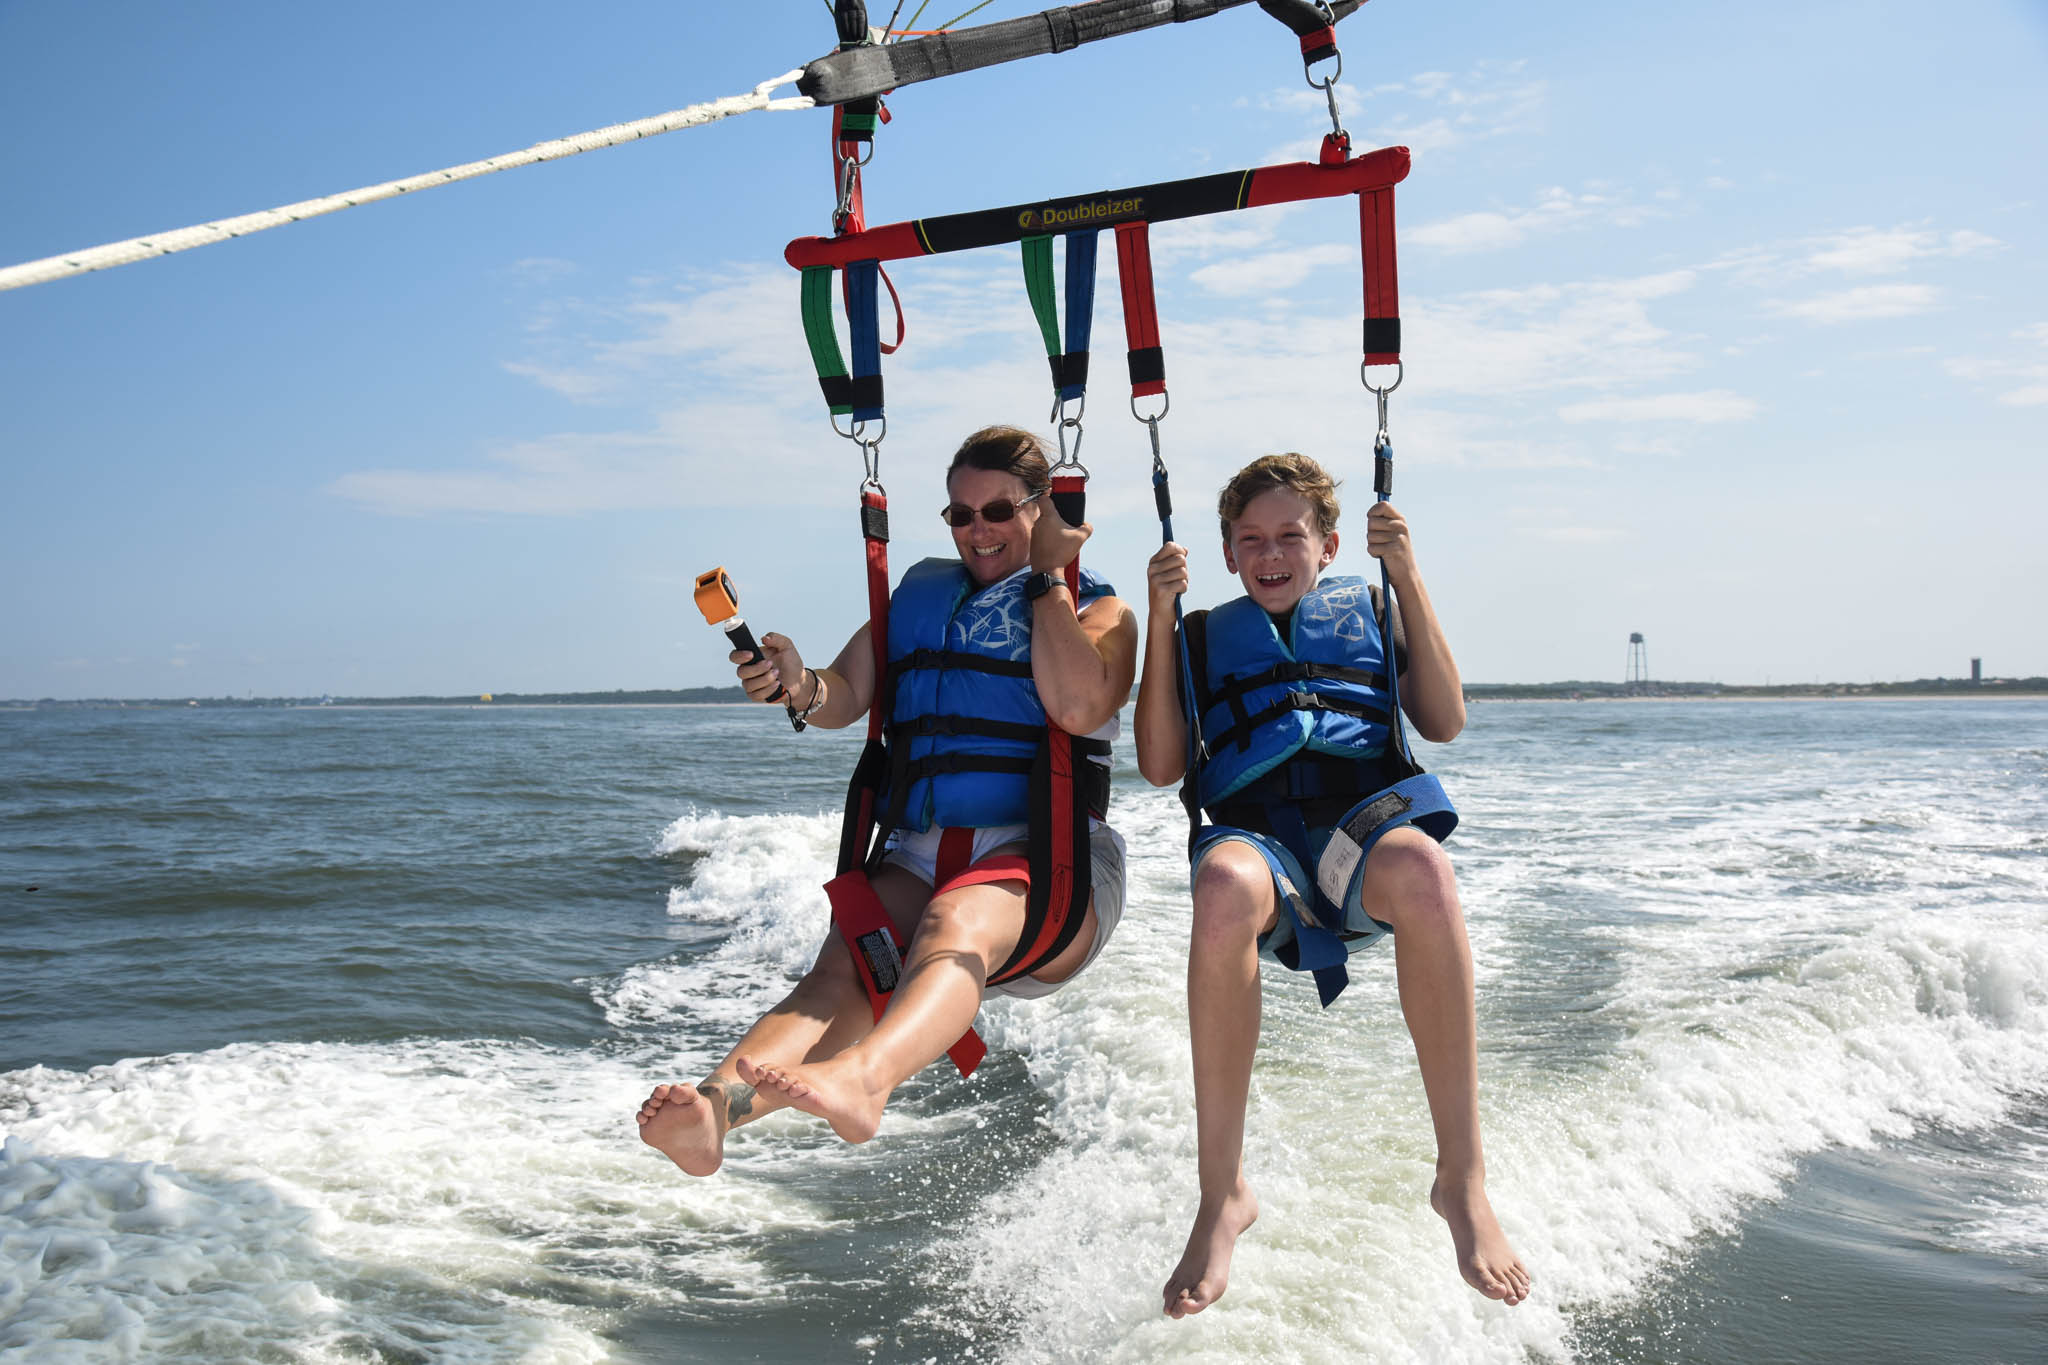 Michelle and Liam just launched off the deck of the East Coast Watersports parasail boat.